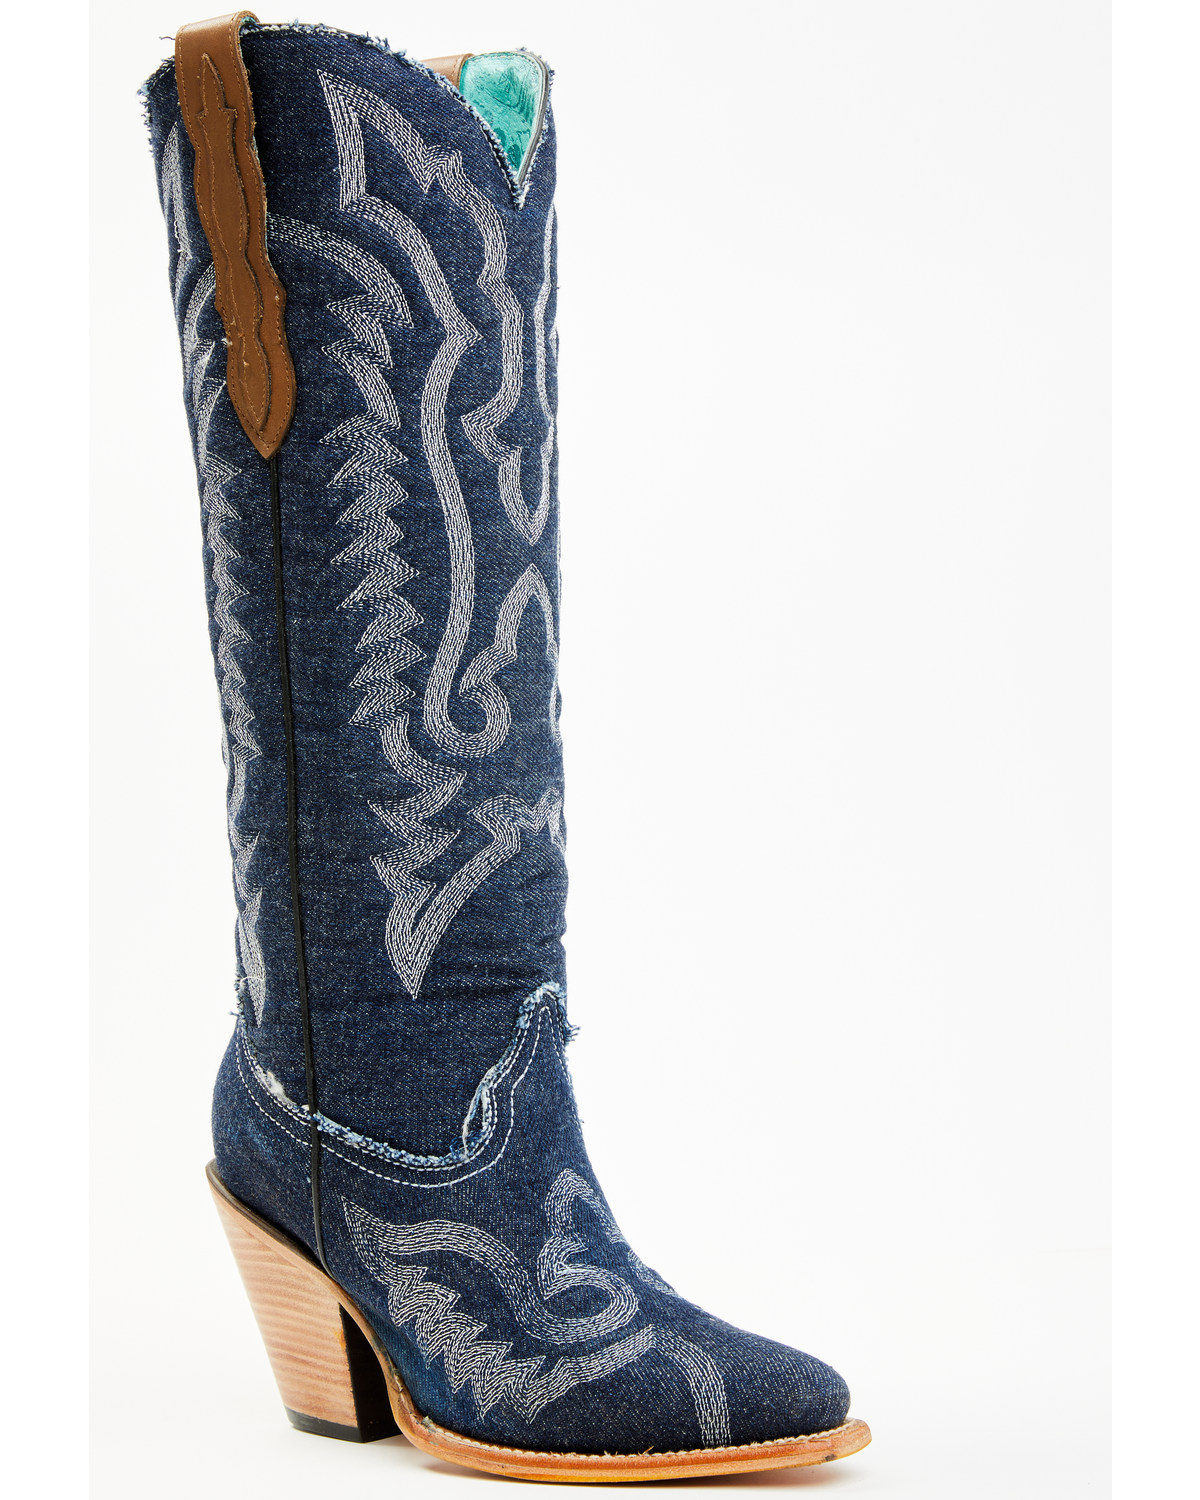 Corral Women's Denim Embroidered Tall Western Boots - Pointed Toe